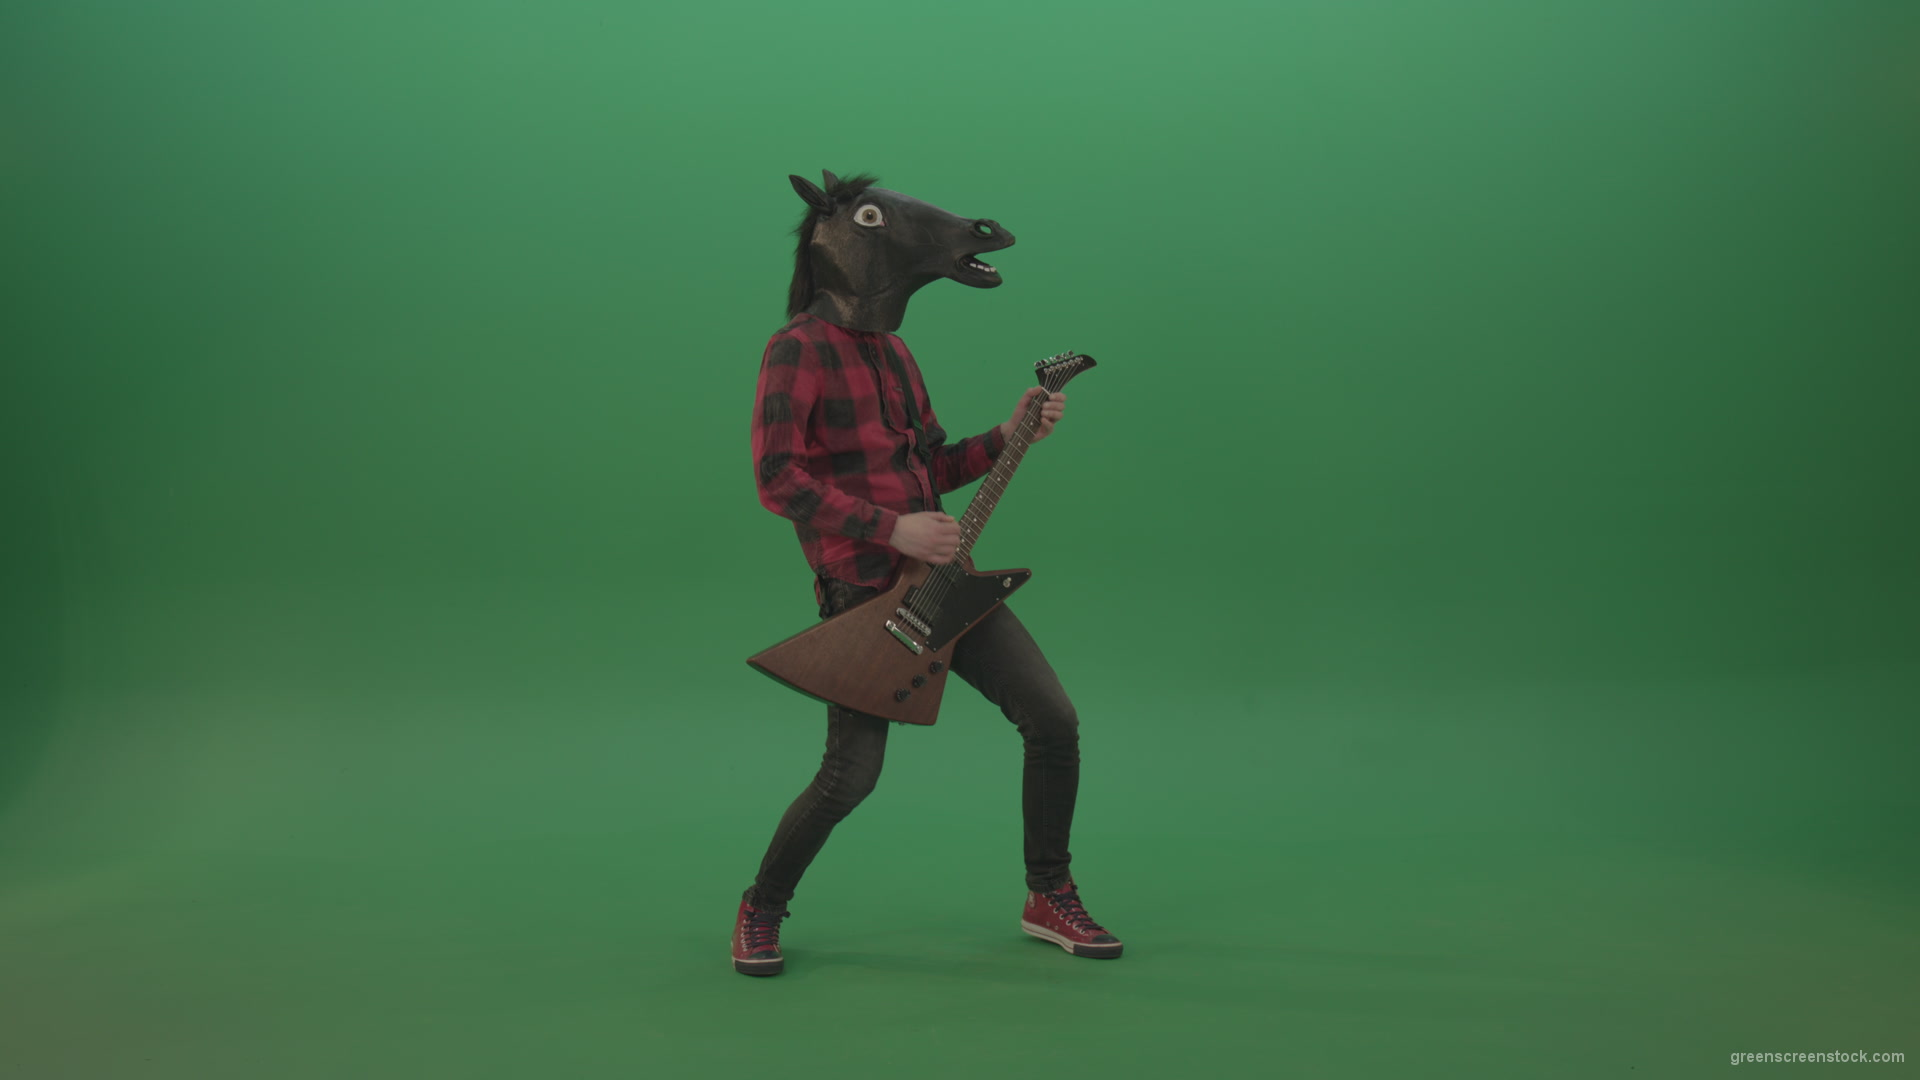 Guitarist-horse-man-with-horse-mask-head-play-guitar-on-green-screen_007 Green Screen Stock